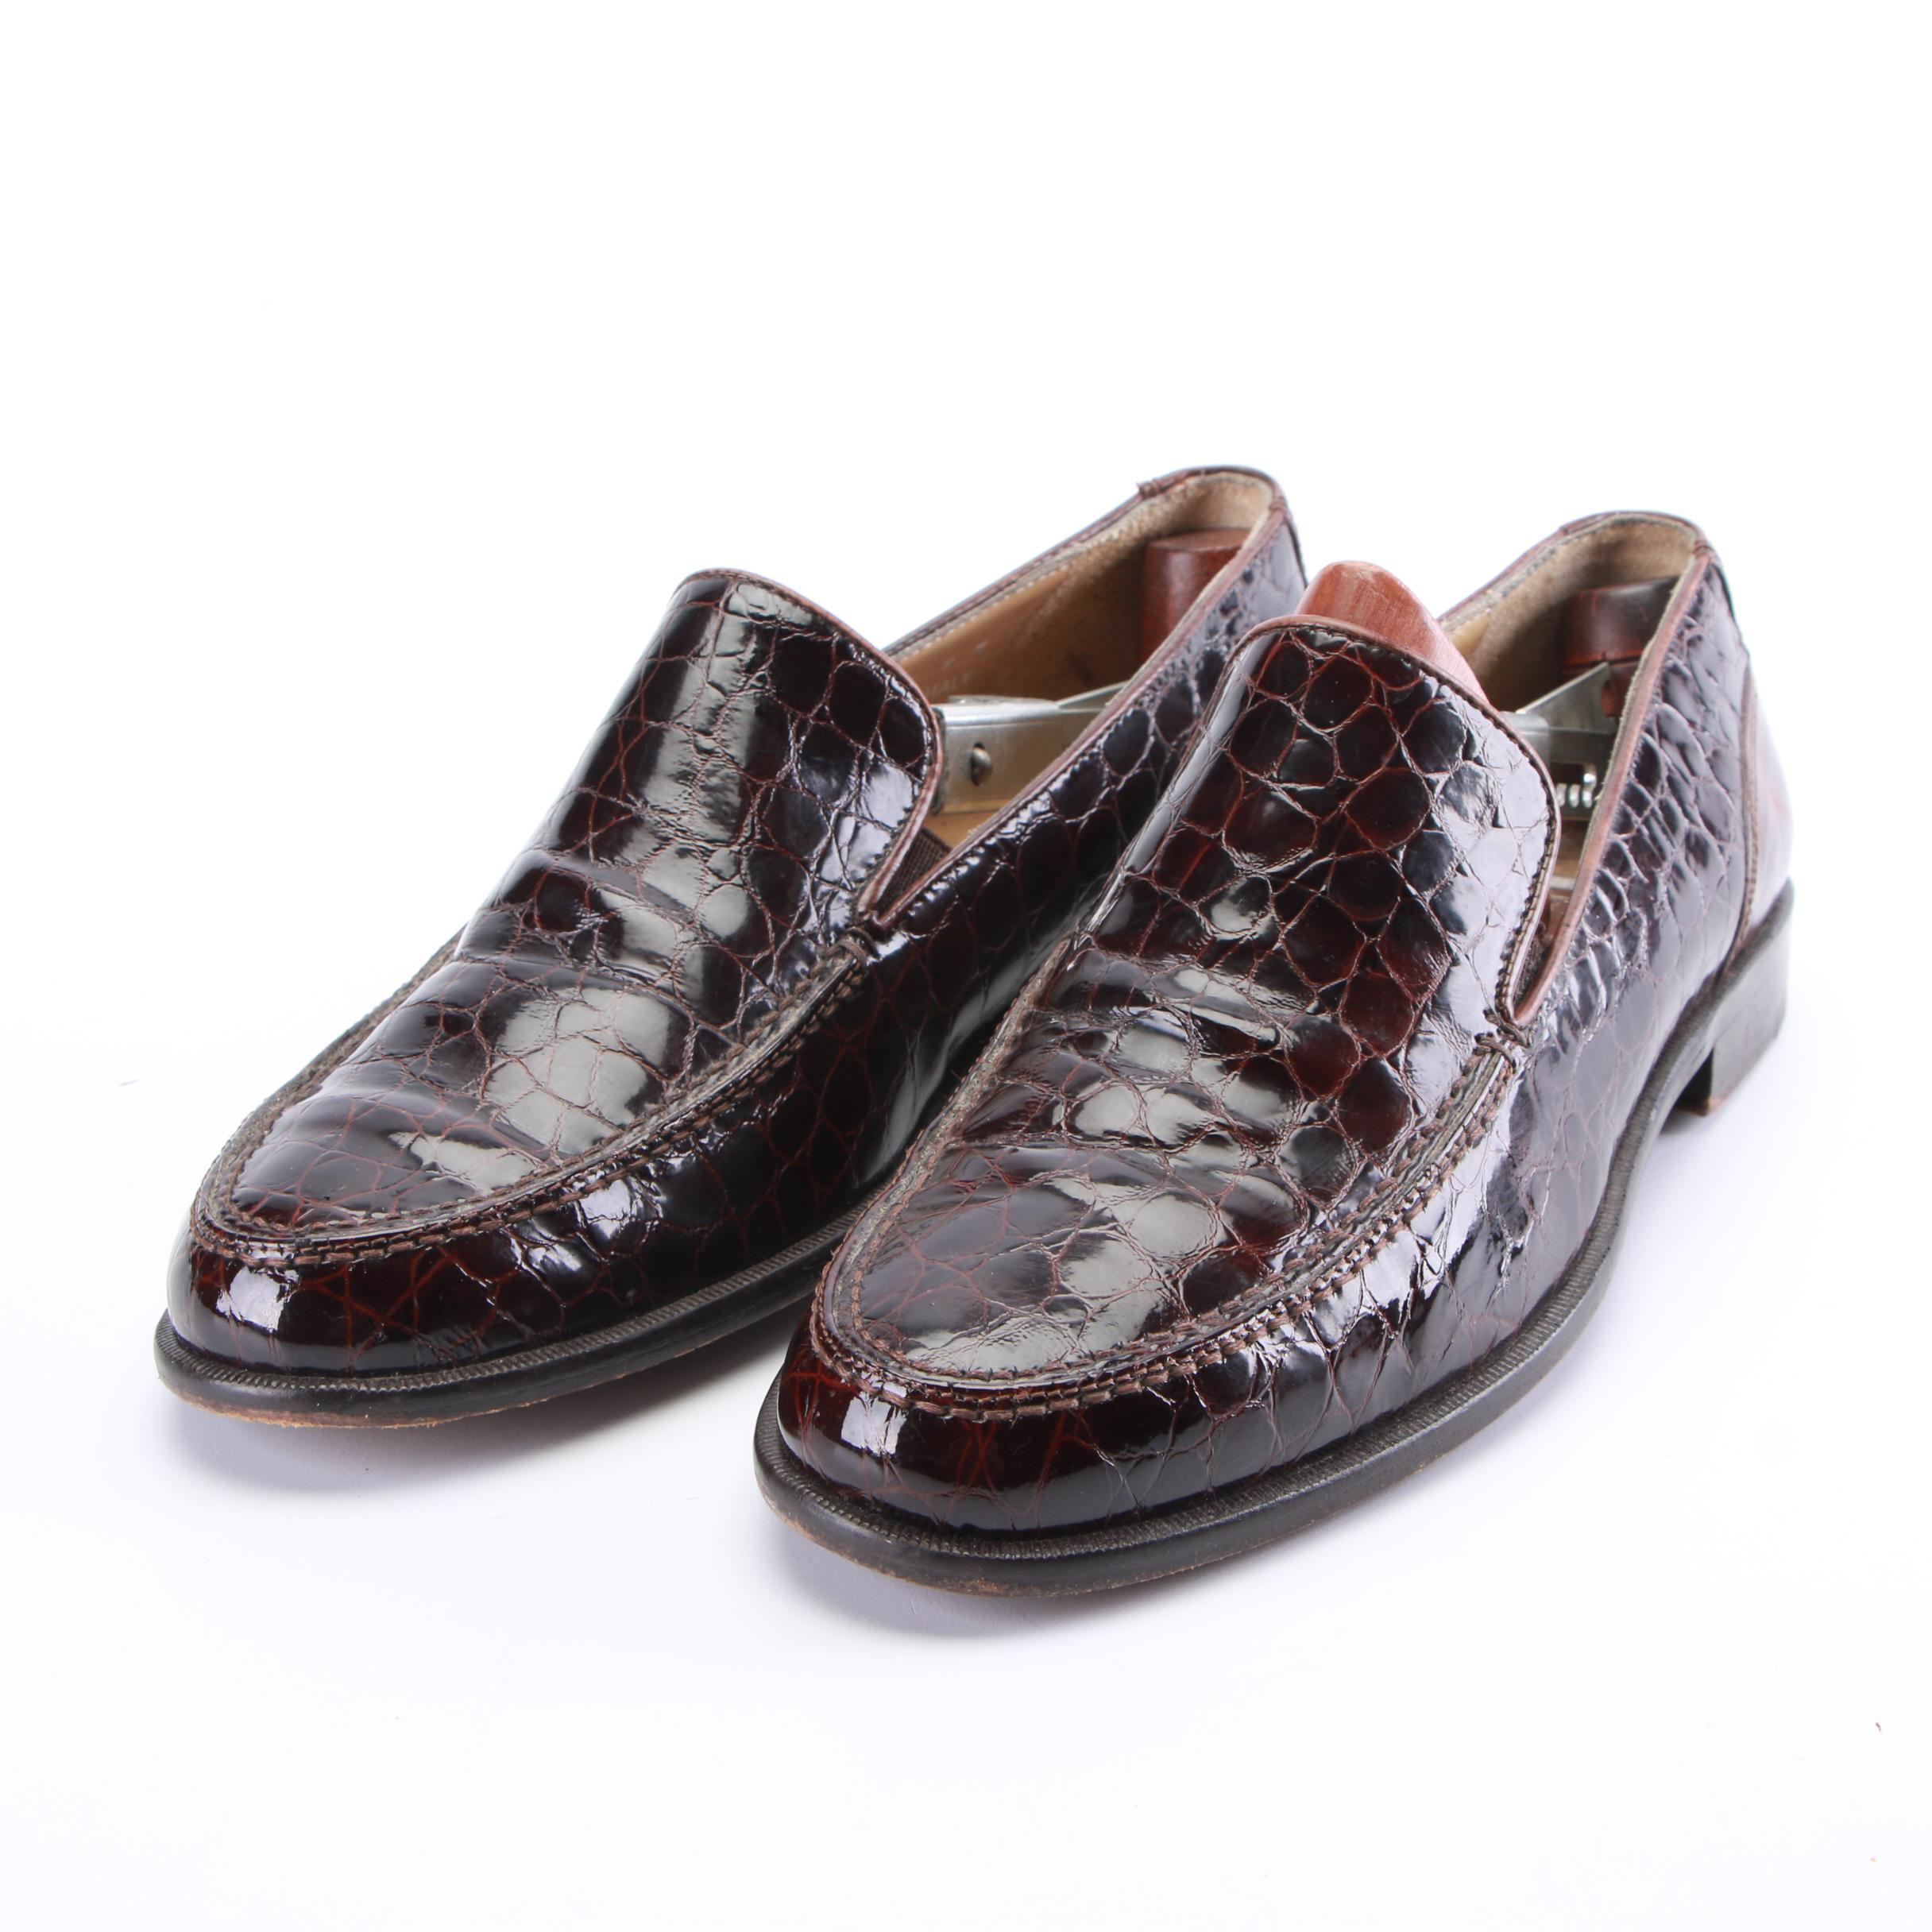 johnston and murphy alligator shoes